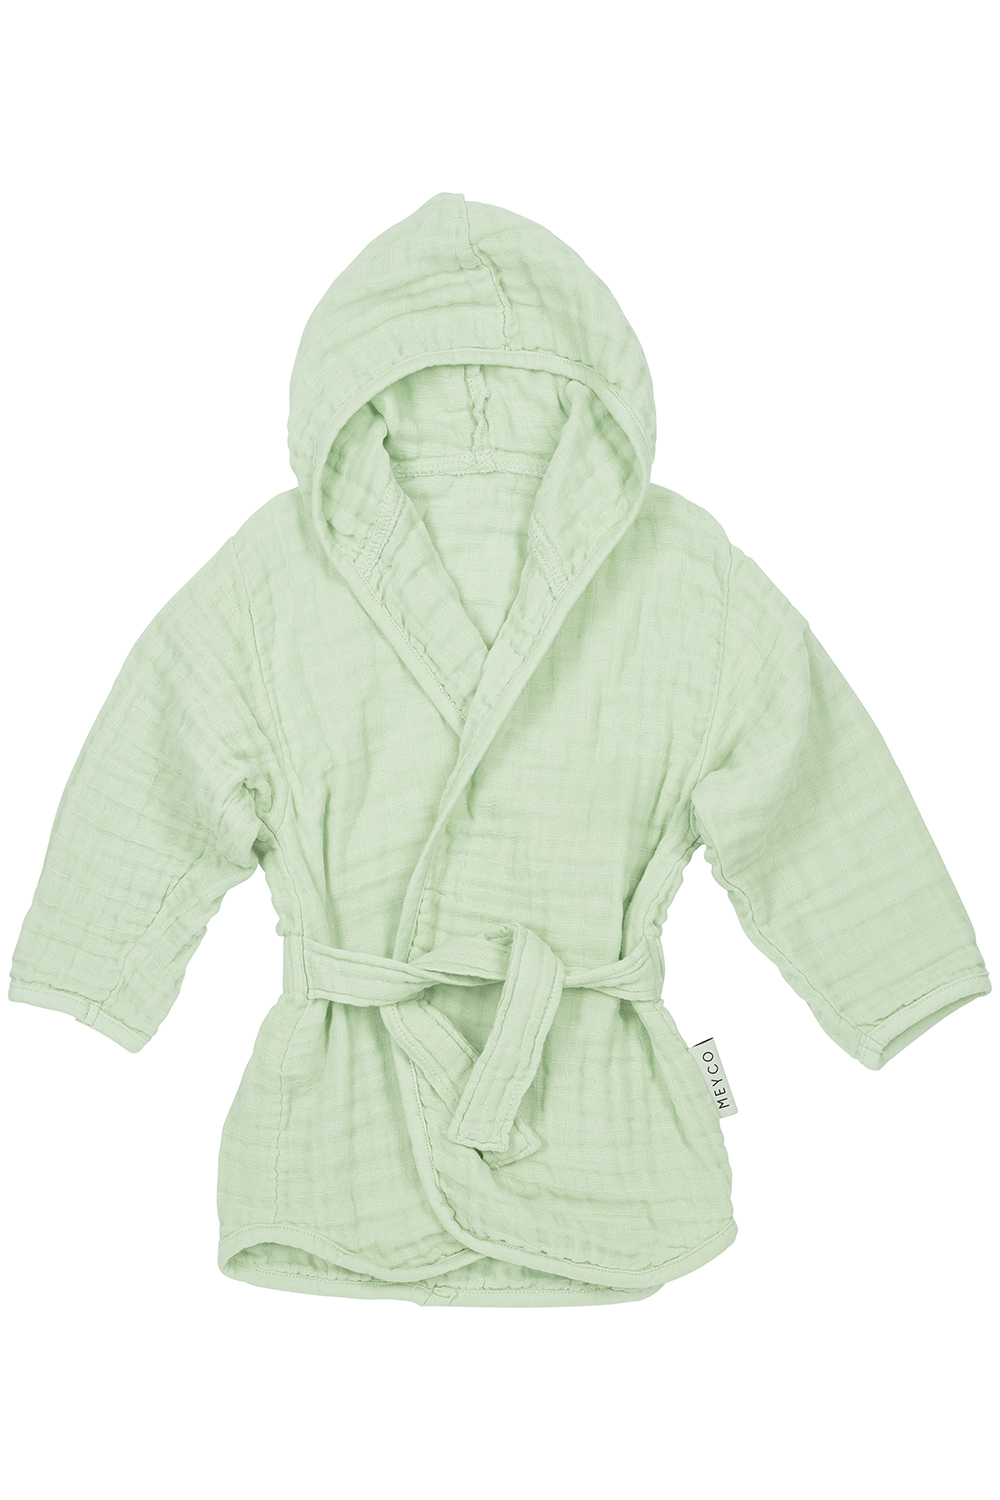 Bademantel pre-washed musselin Uni - soft green - 98/104